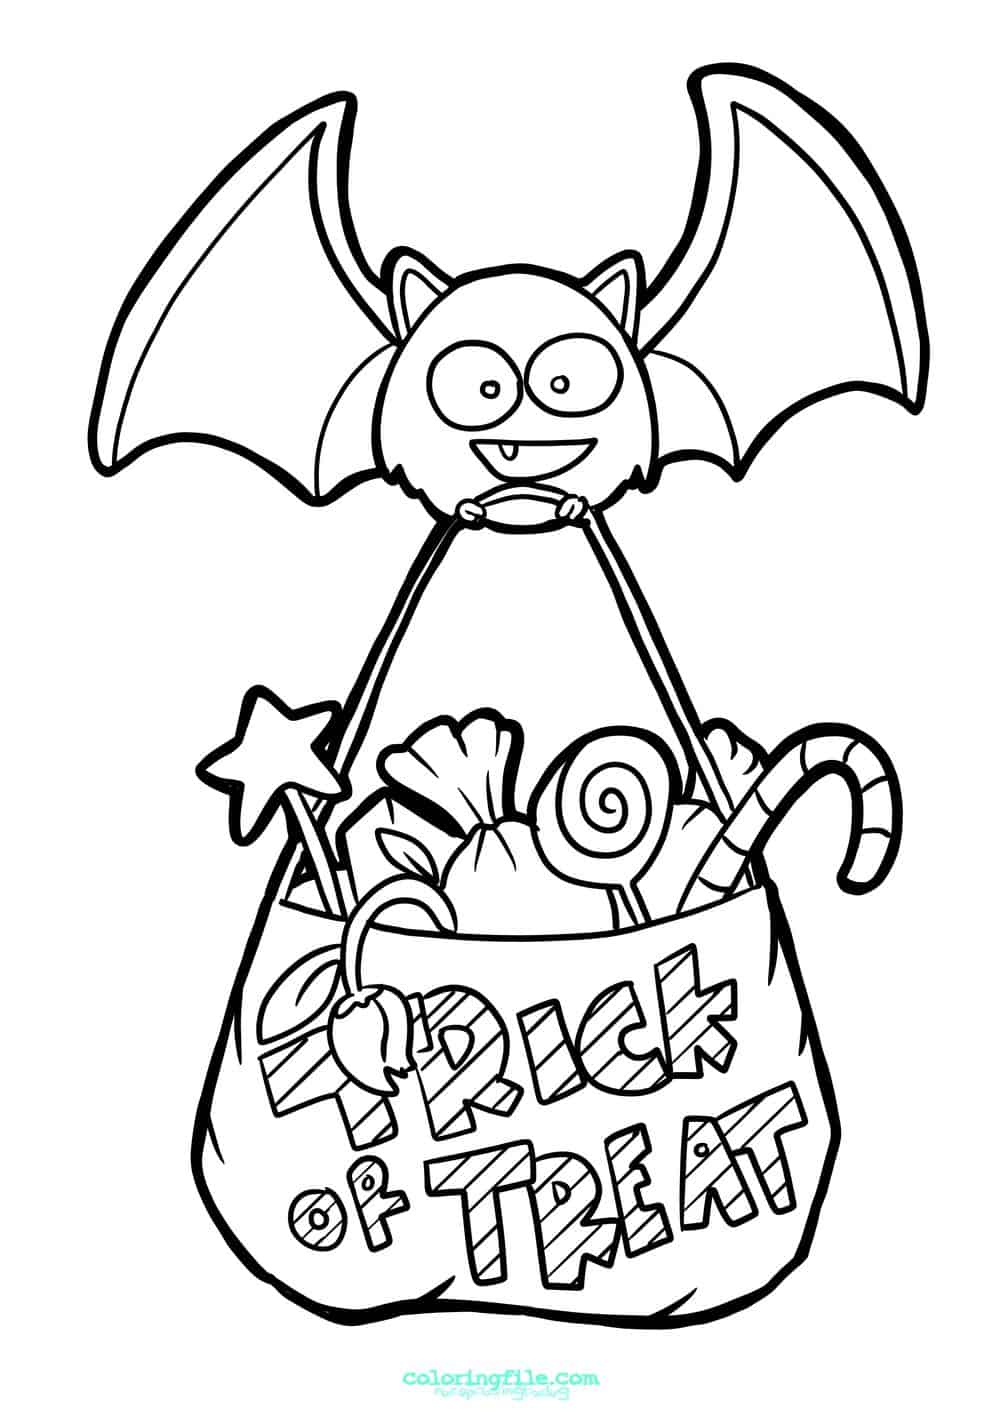 Trick or treat halloween bat coloring pages